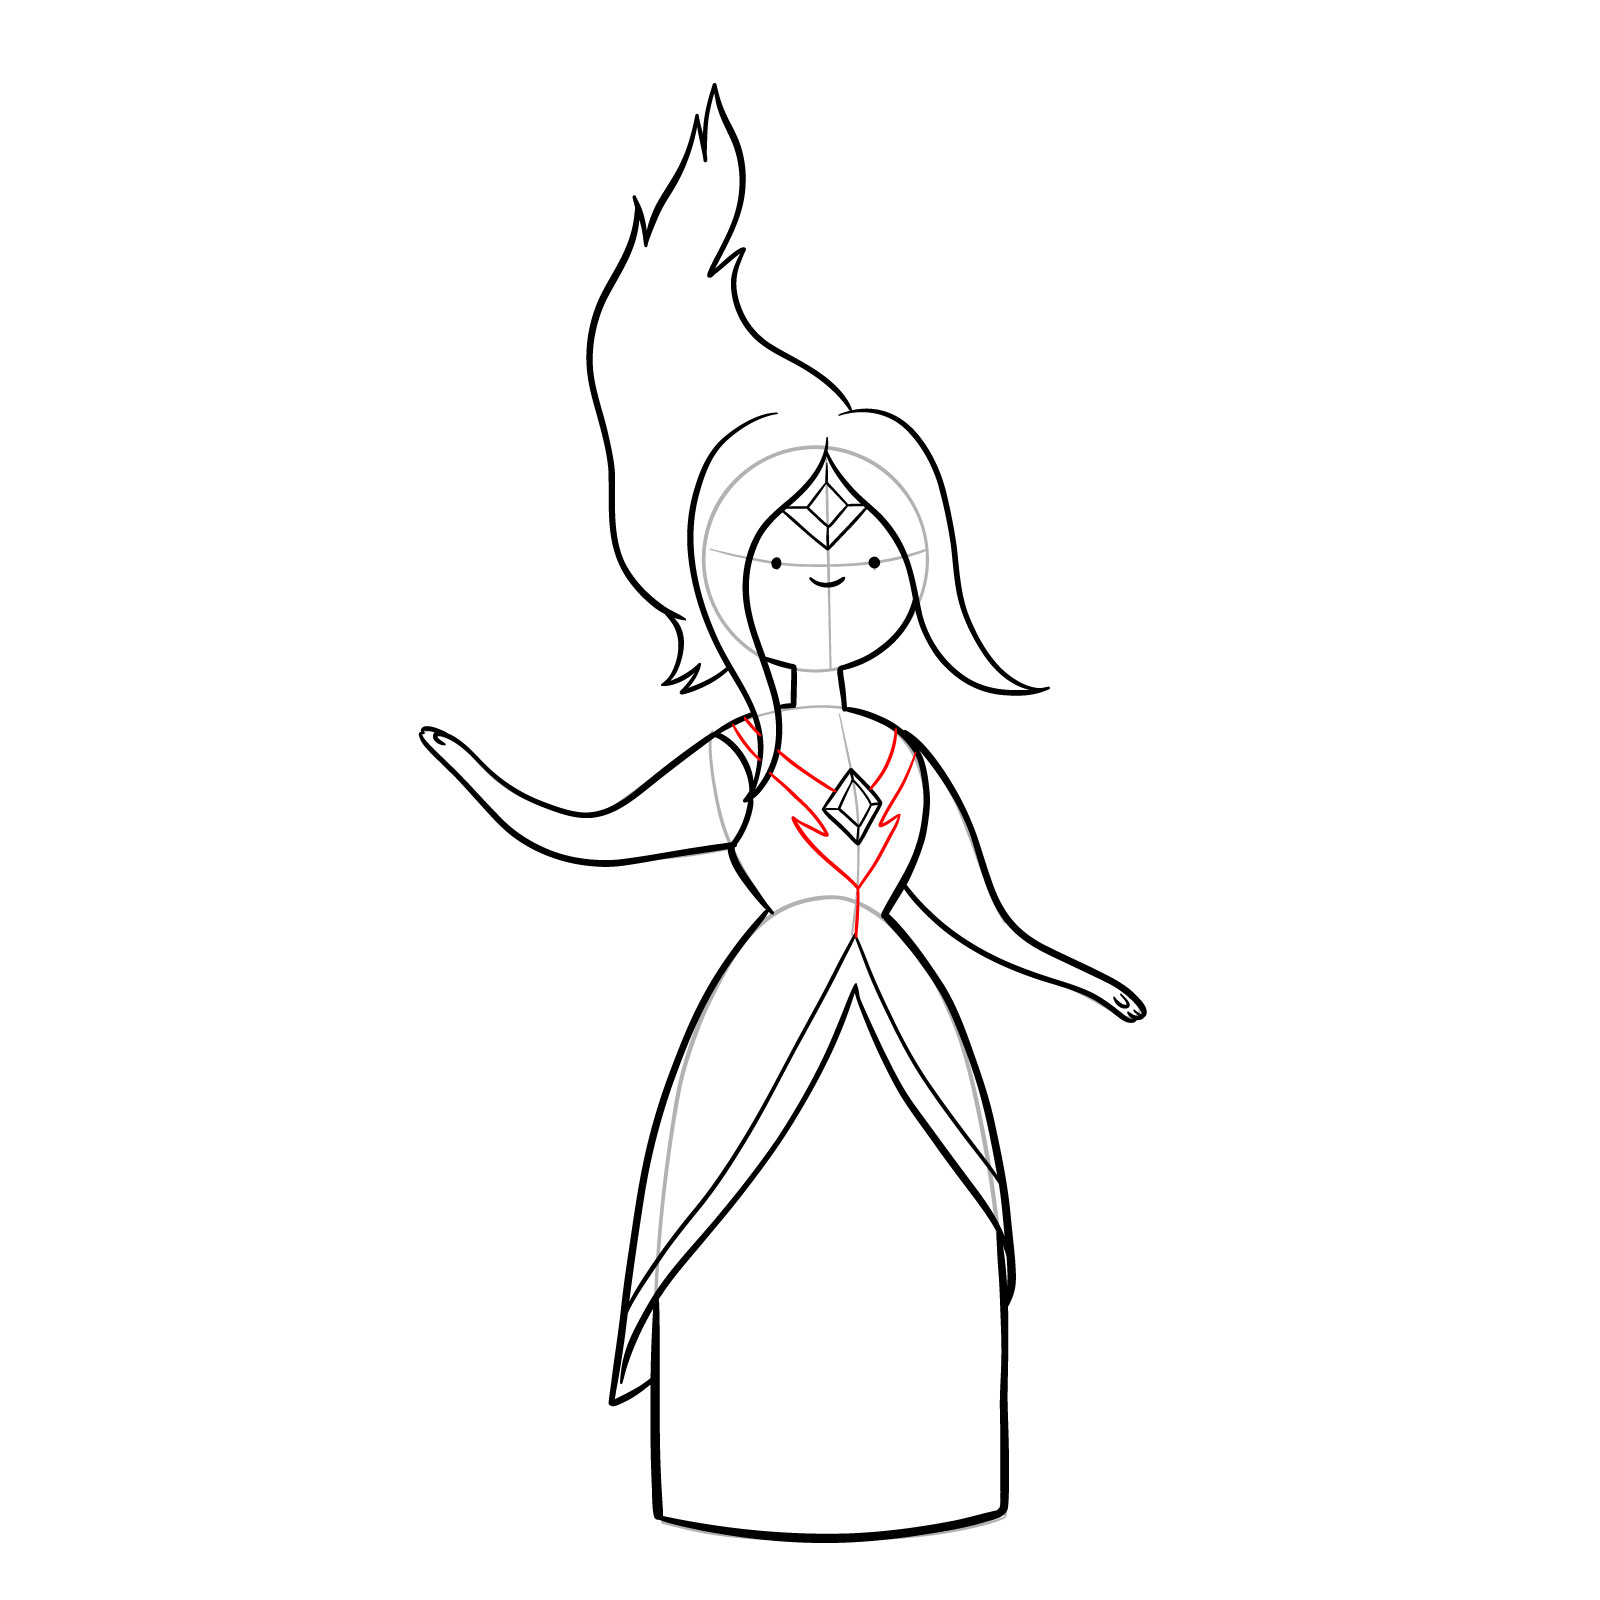 How to draw Flame Princess from Incendium Episode - step 19